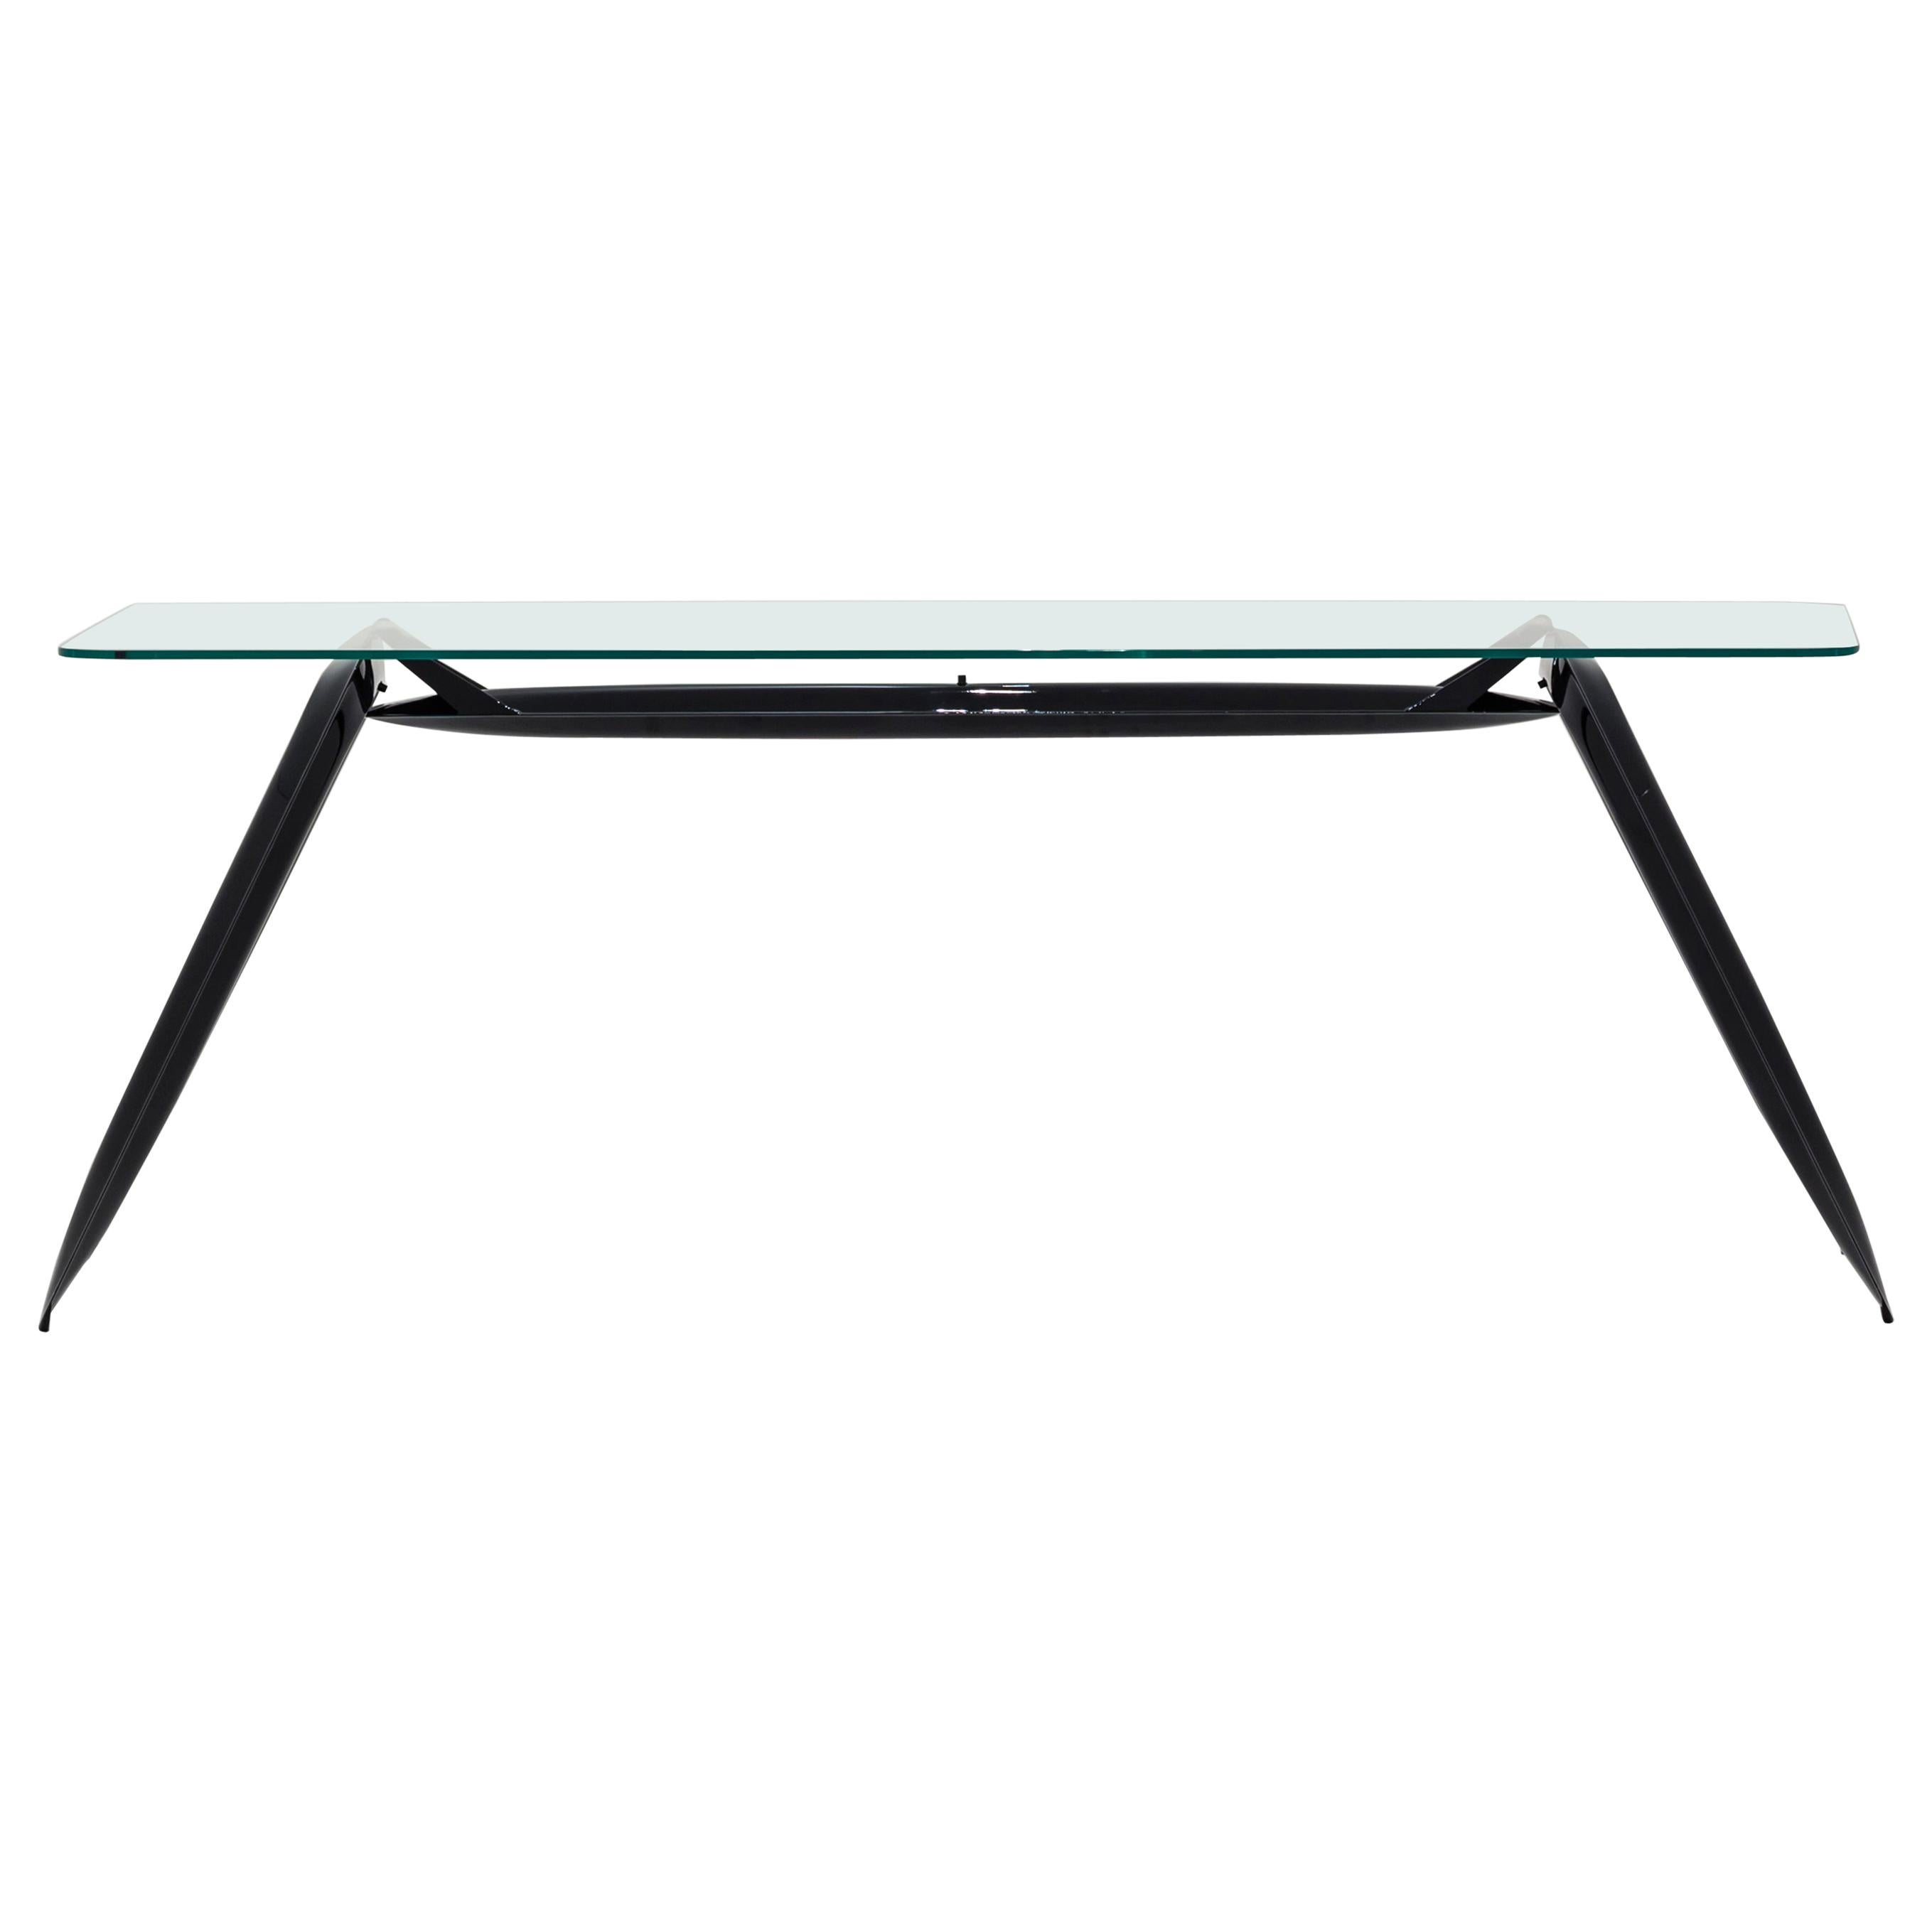 Nogi Table Polished Black Glossy Color Carbon Steel Writing Table by Zieta For Sale